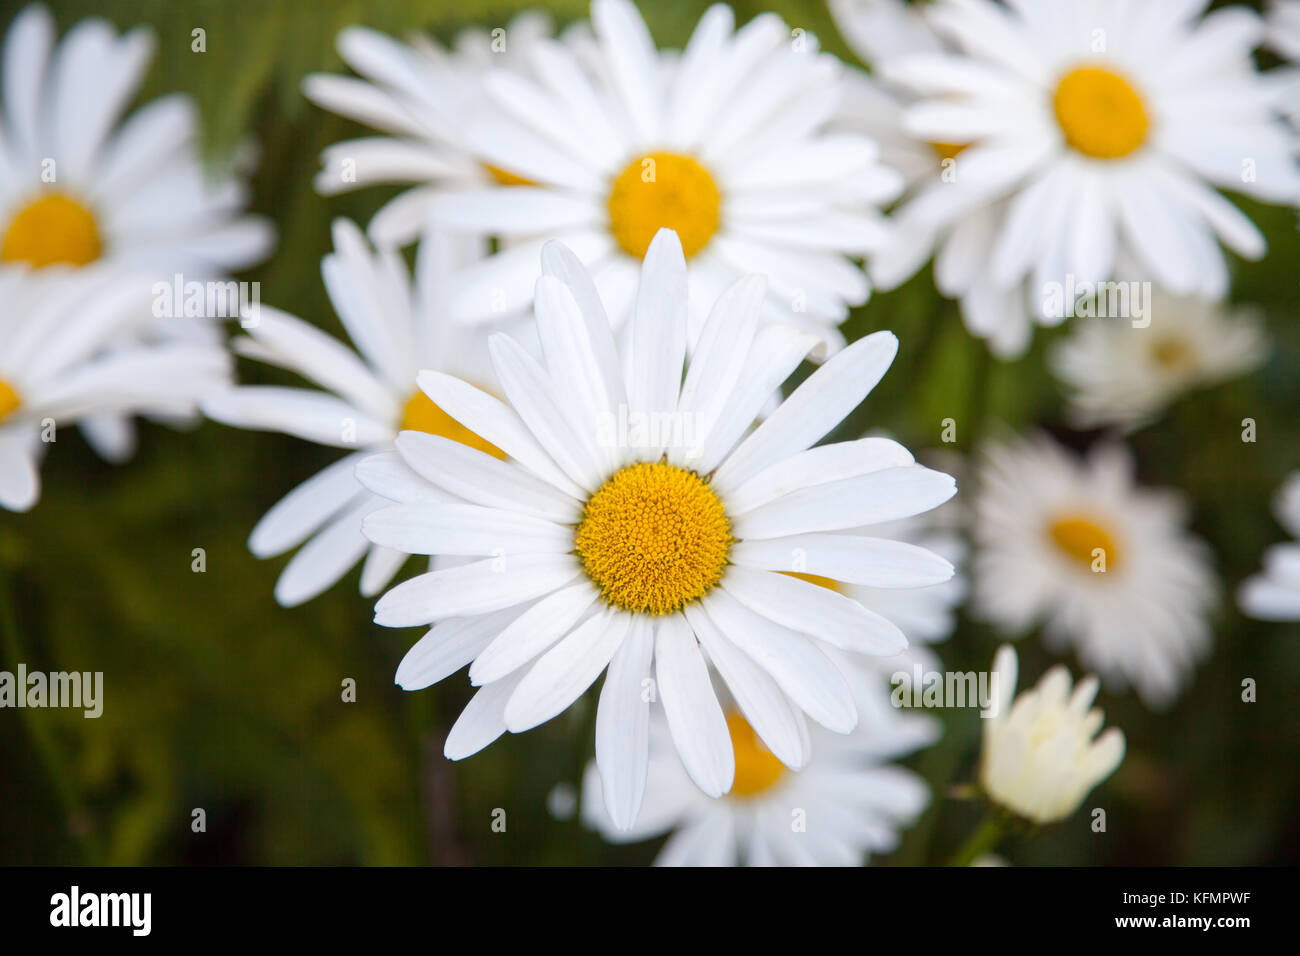 A lotof white flowers of camomile (daisy). One flower in focus. The other are defocused. Natural blurred dark green background. Stock Photo